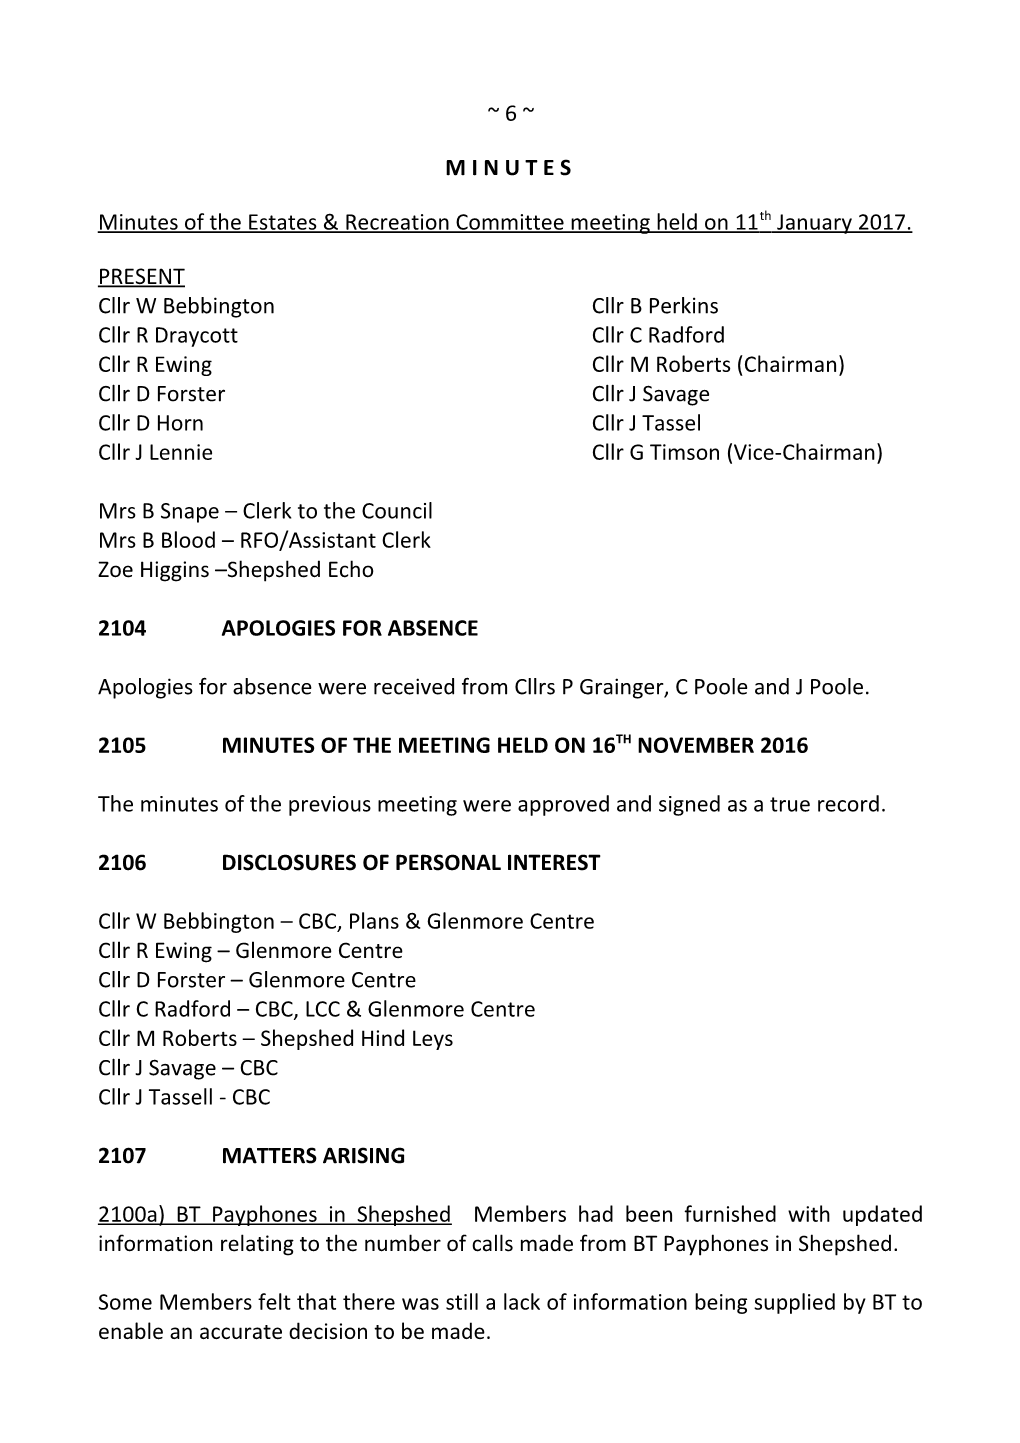 Minutes of the Estates & Recreation Committee Meeting Held on 11Th January 2017